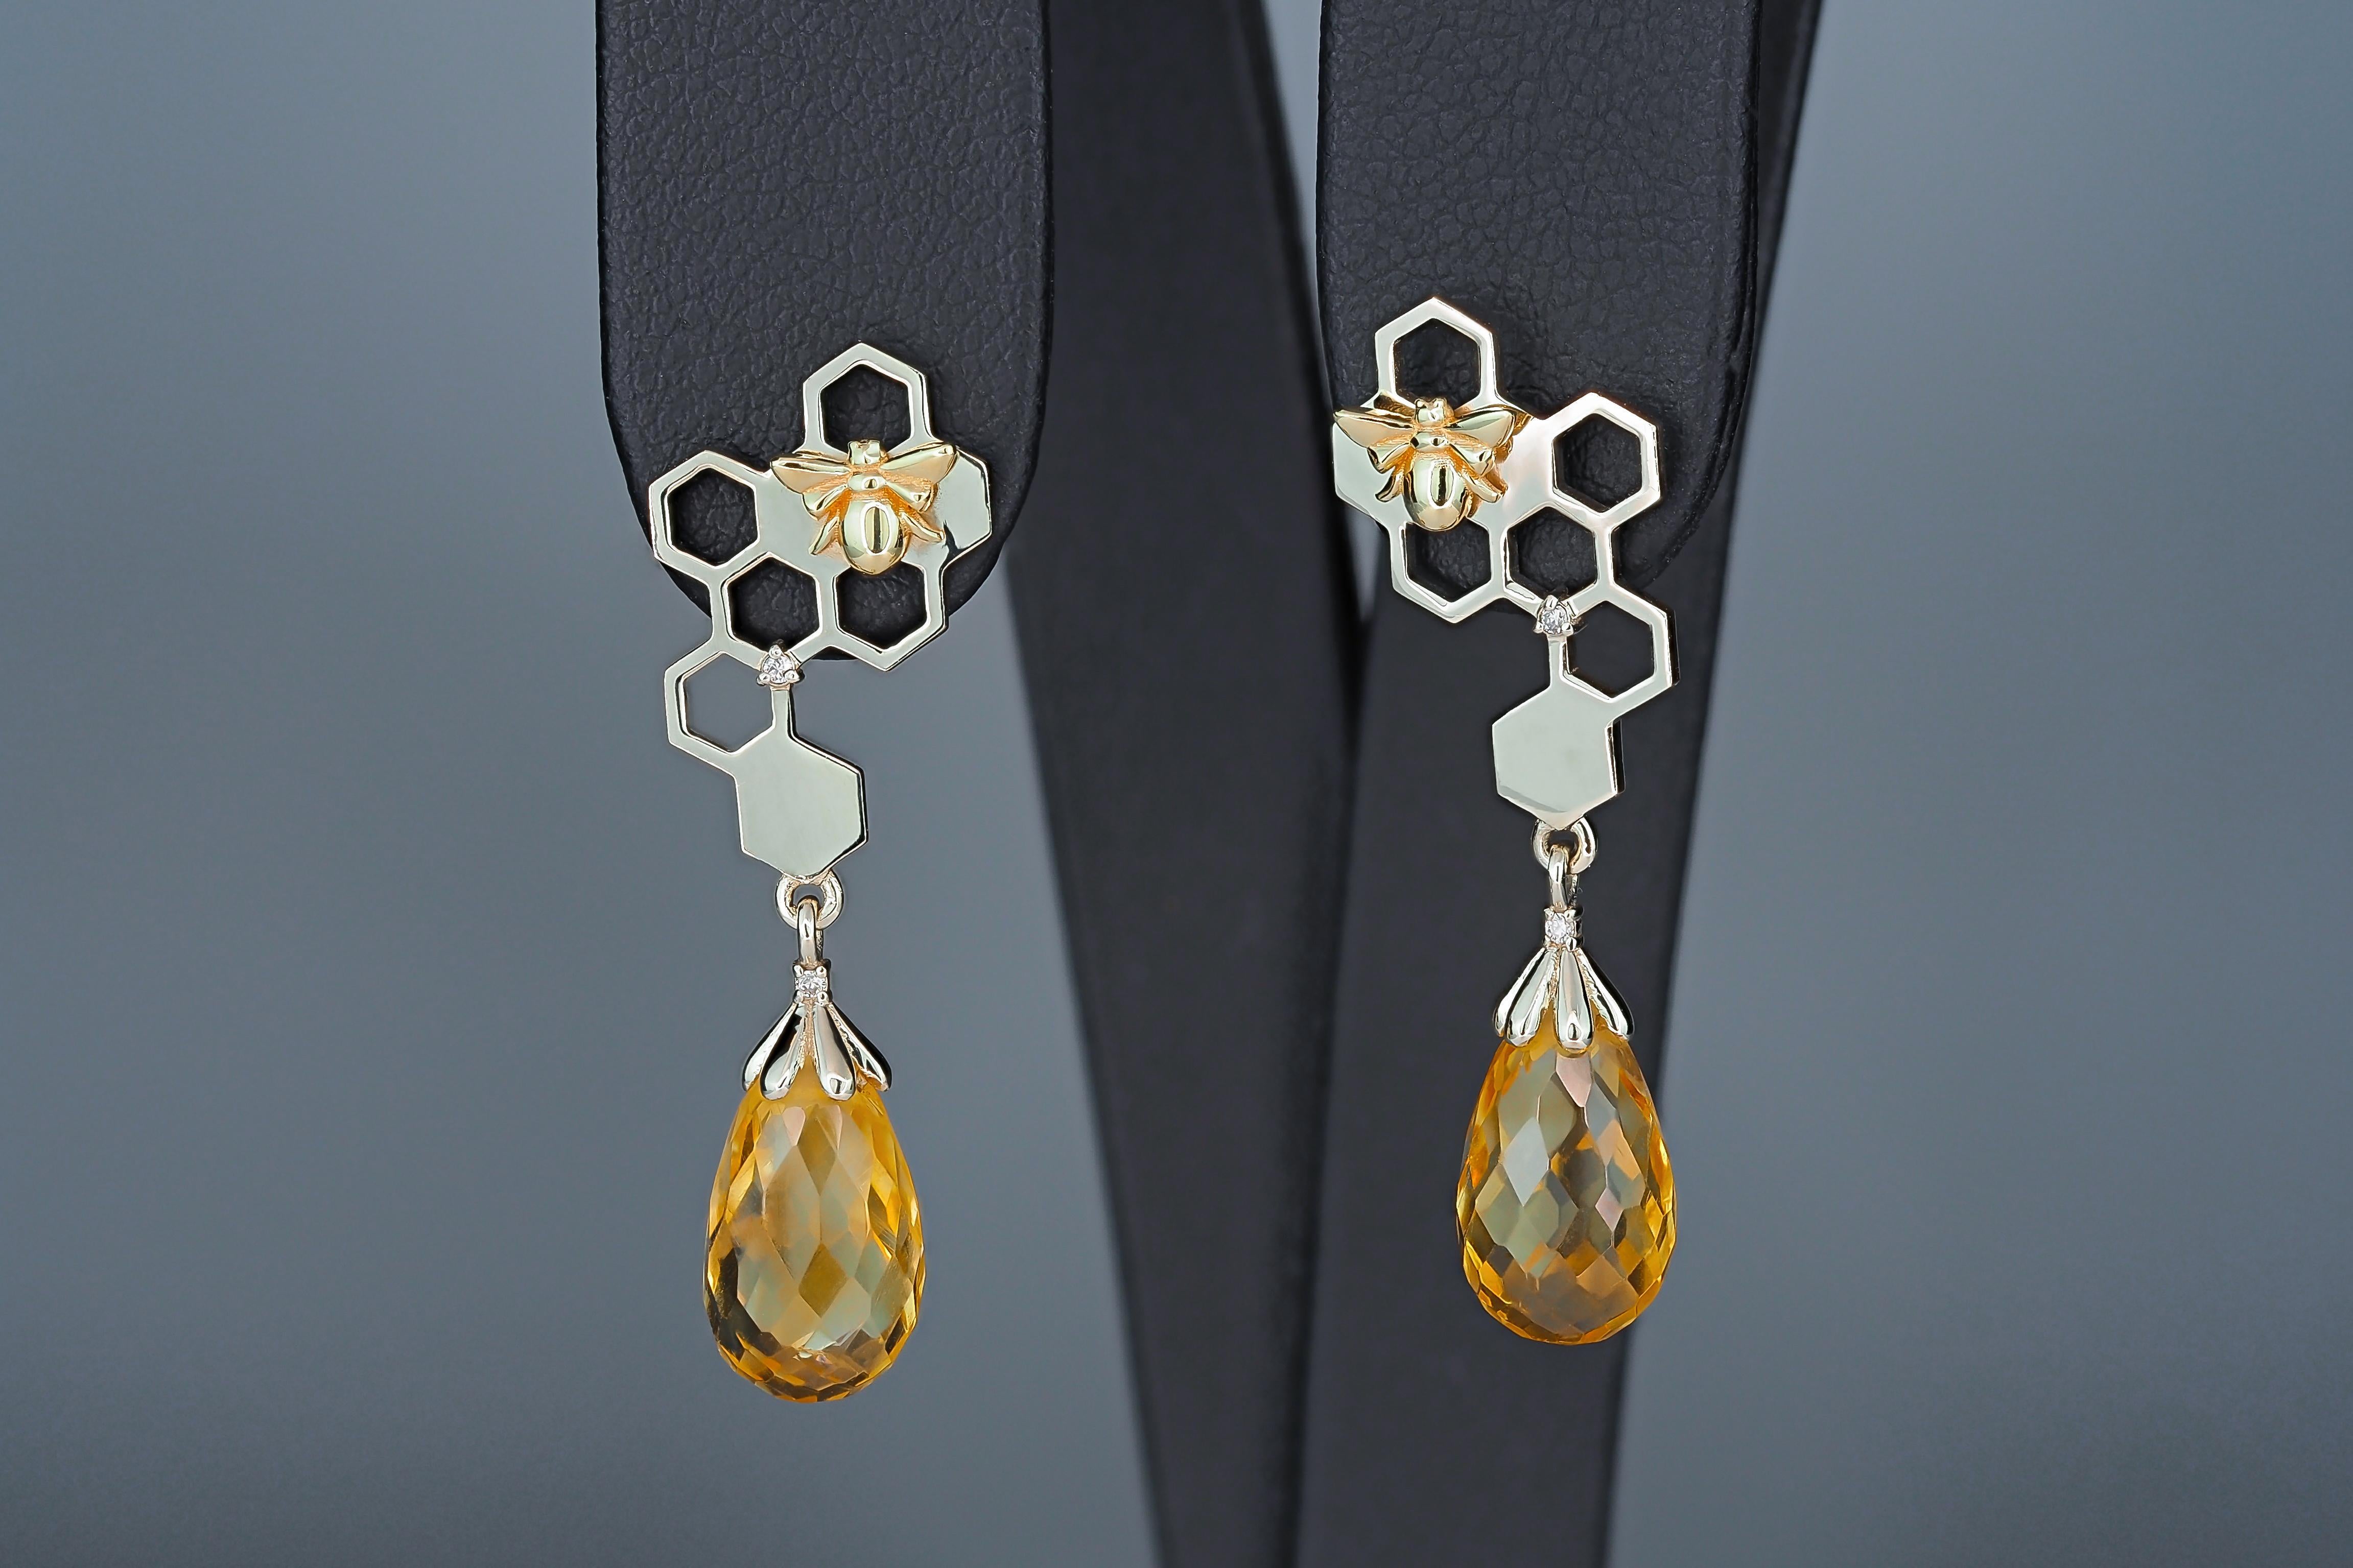 Citrine earrings studs in 14 k gold. 
Citrine dangle earrings. Queen Bee on honeycomb 14k solid gold earrings. GoldBee earrings.

Gold white and yellow (bee) 14k marked.
Weight: 4.21 g.
Earrings size - 33x11.3 mm.

Citrines 2 pieces -yellow color,